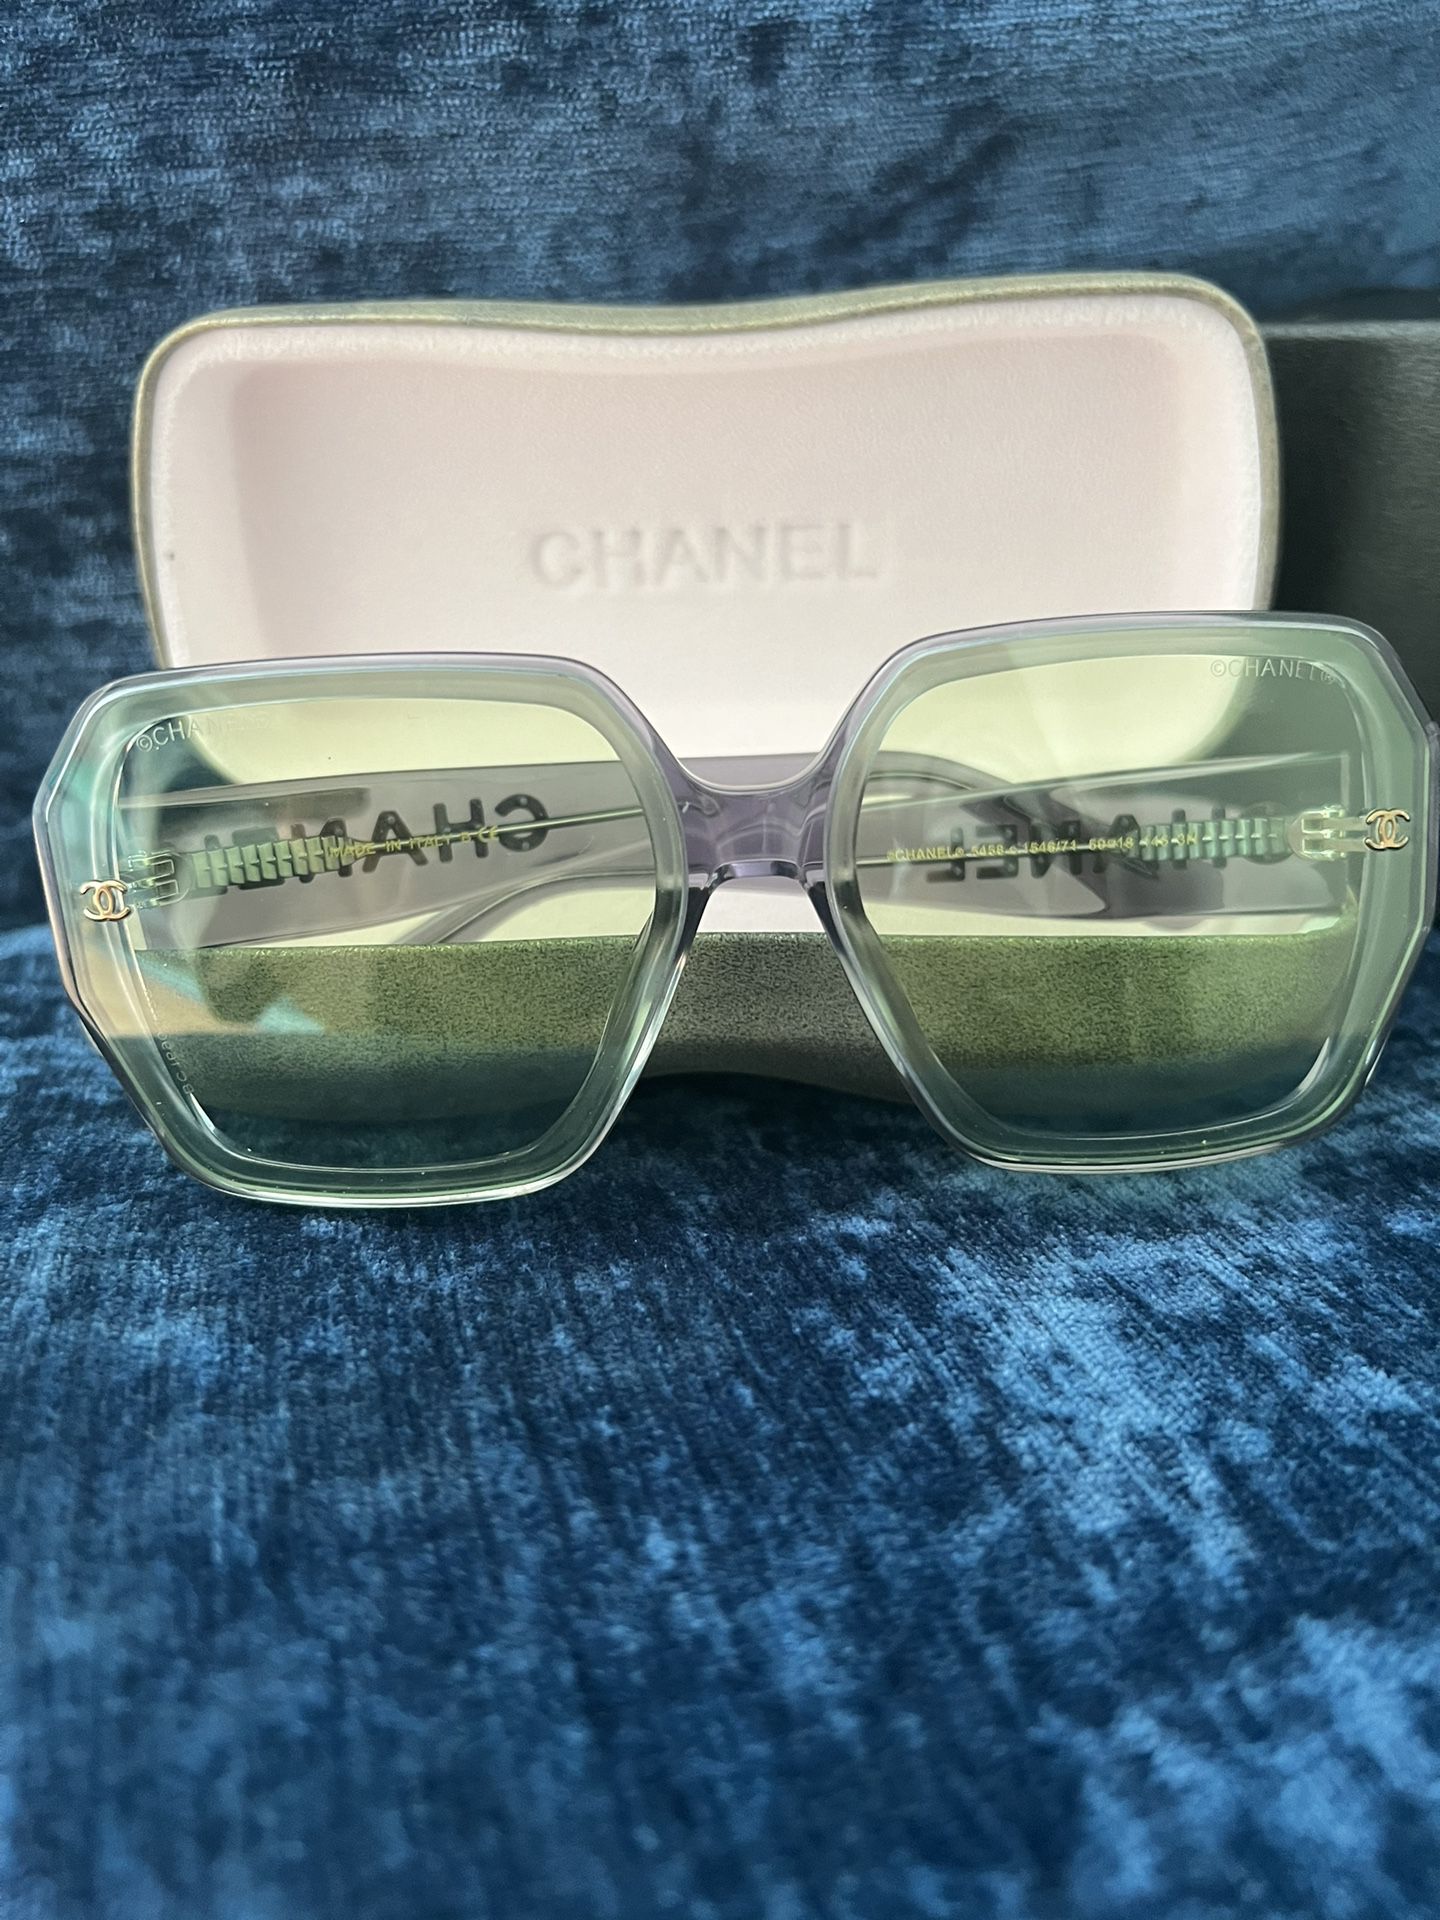 Chanel Sunglasses Authentic for Sale in Sunny Isles Beach, FL